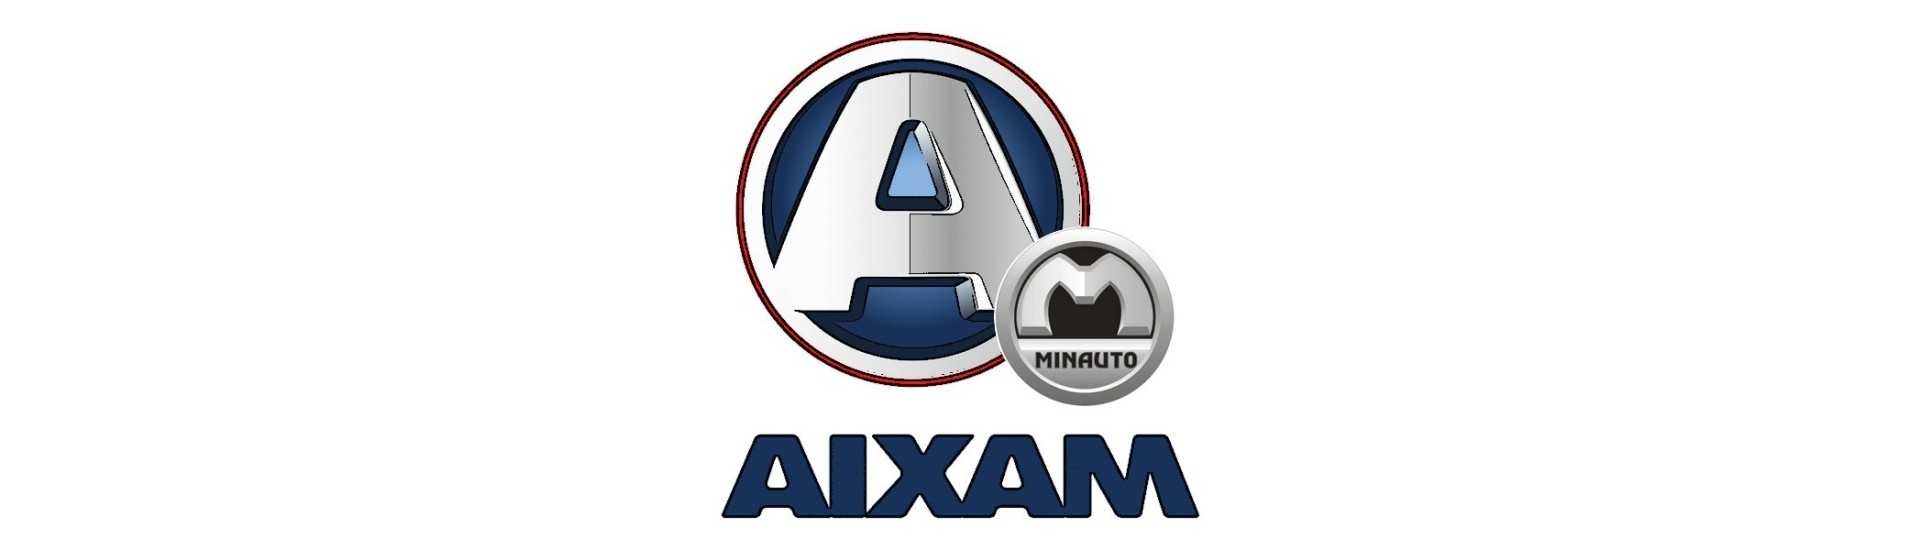 Air Deflector at the best price car without a permit Aixam Minauto